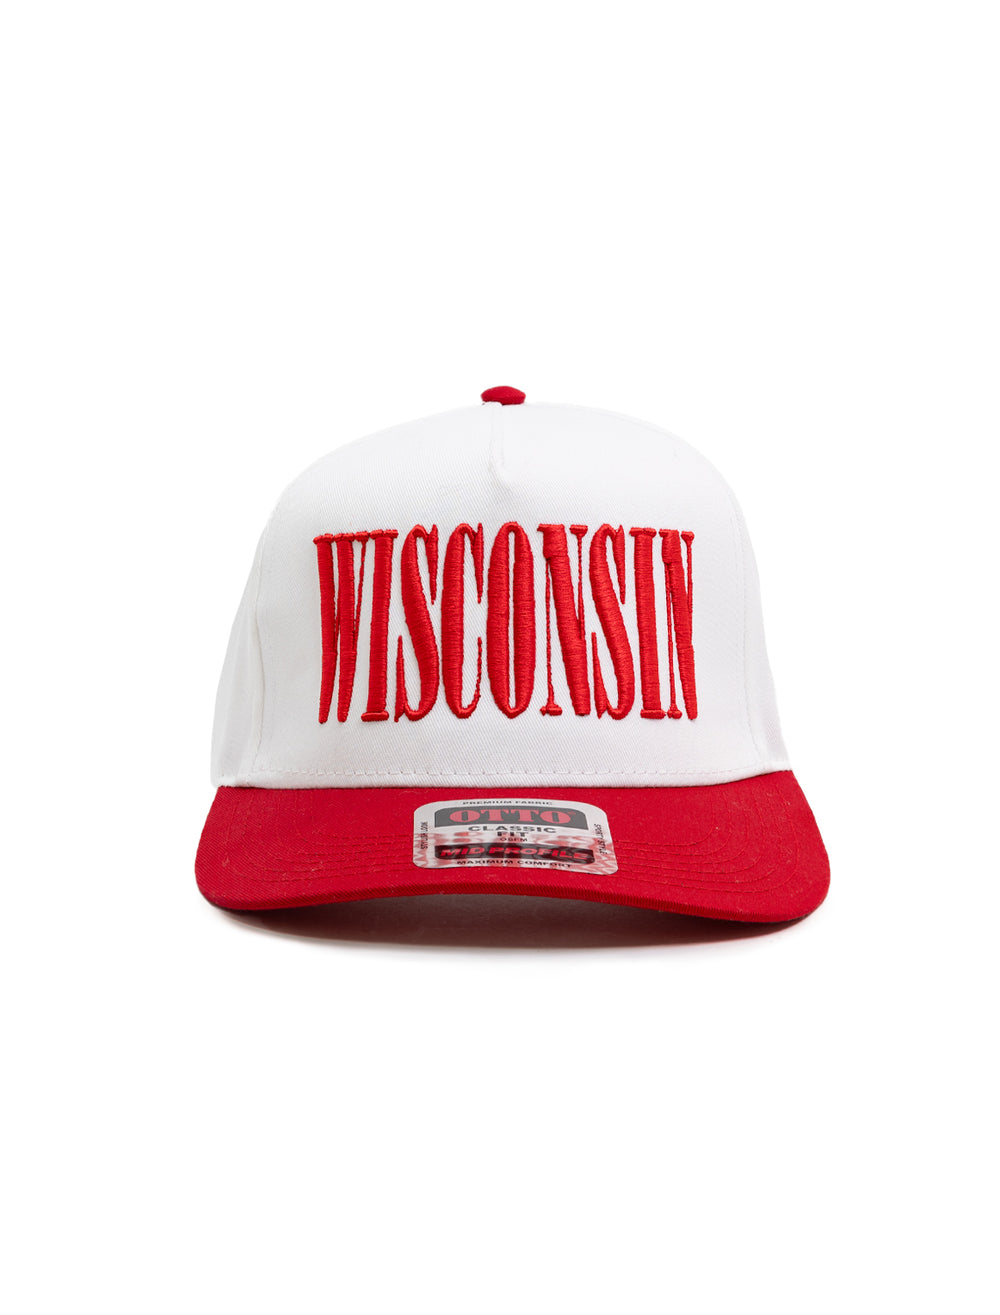 Front view of Recess Apparel's Wisconsin Stretch Contrast Cap in Red and White.